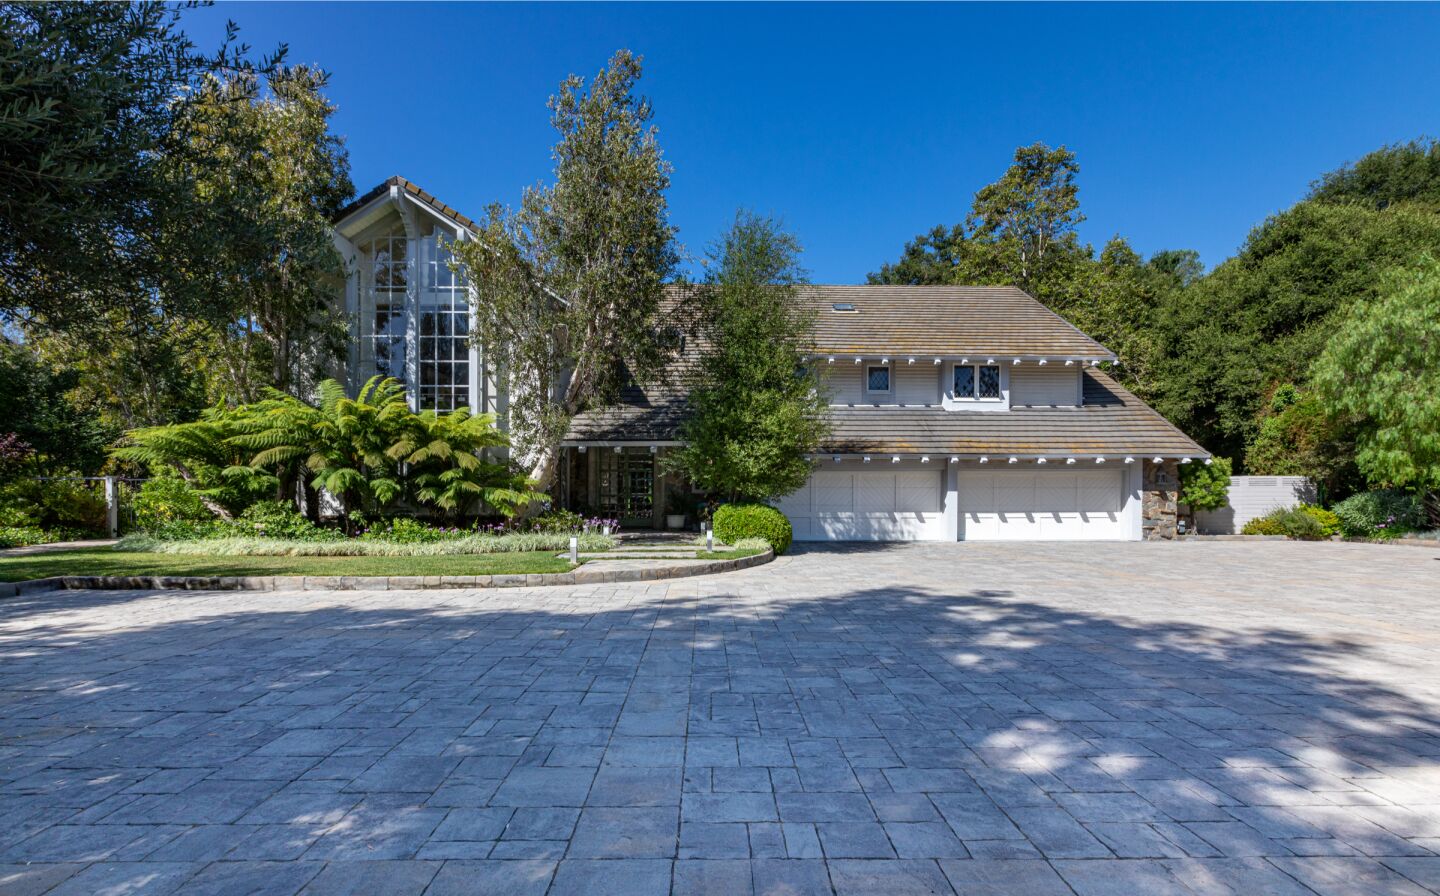 The 1.3-acre estate includes a five-bedroom home, tennis court, swimming pool and spa.